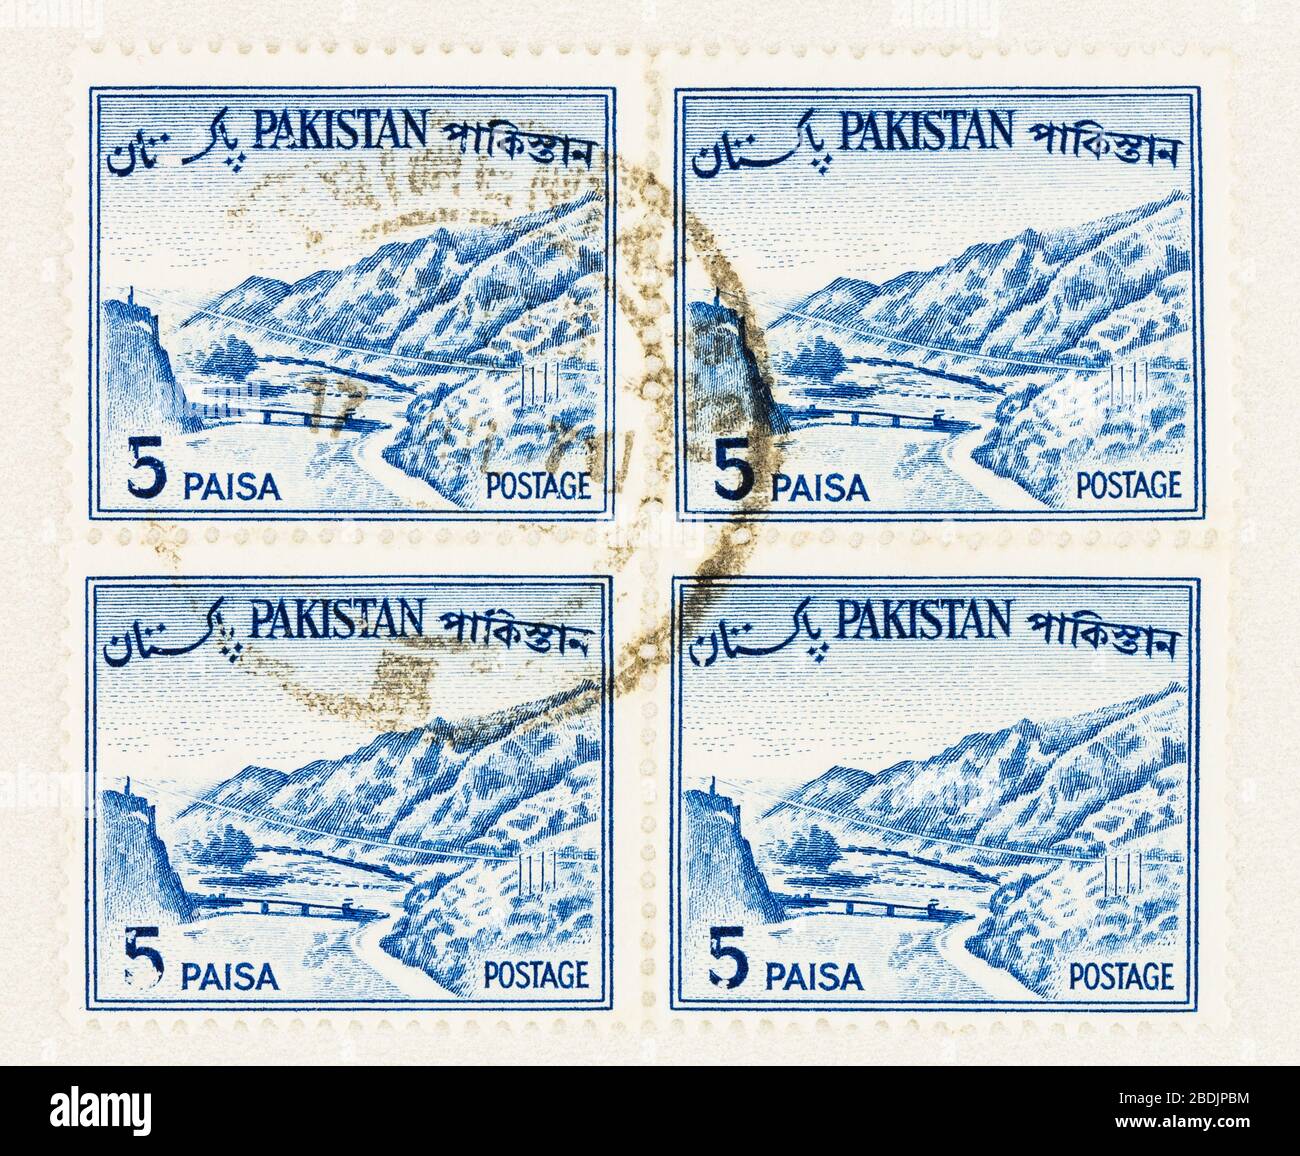 SEATTLE WASHINGTON - April 5, 2020: Close up of 4 joined blue Pakistan stamps of 1961 featuring the Khyber Pass.  Scott # 132. Stock Photo